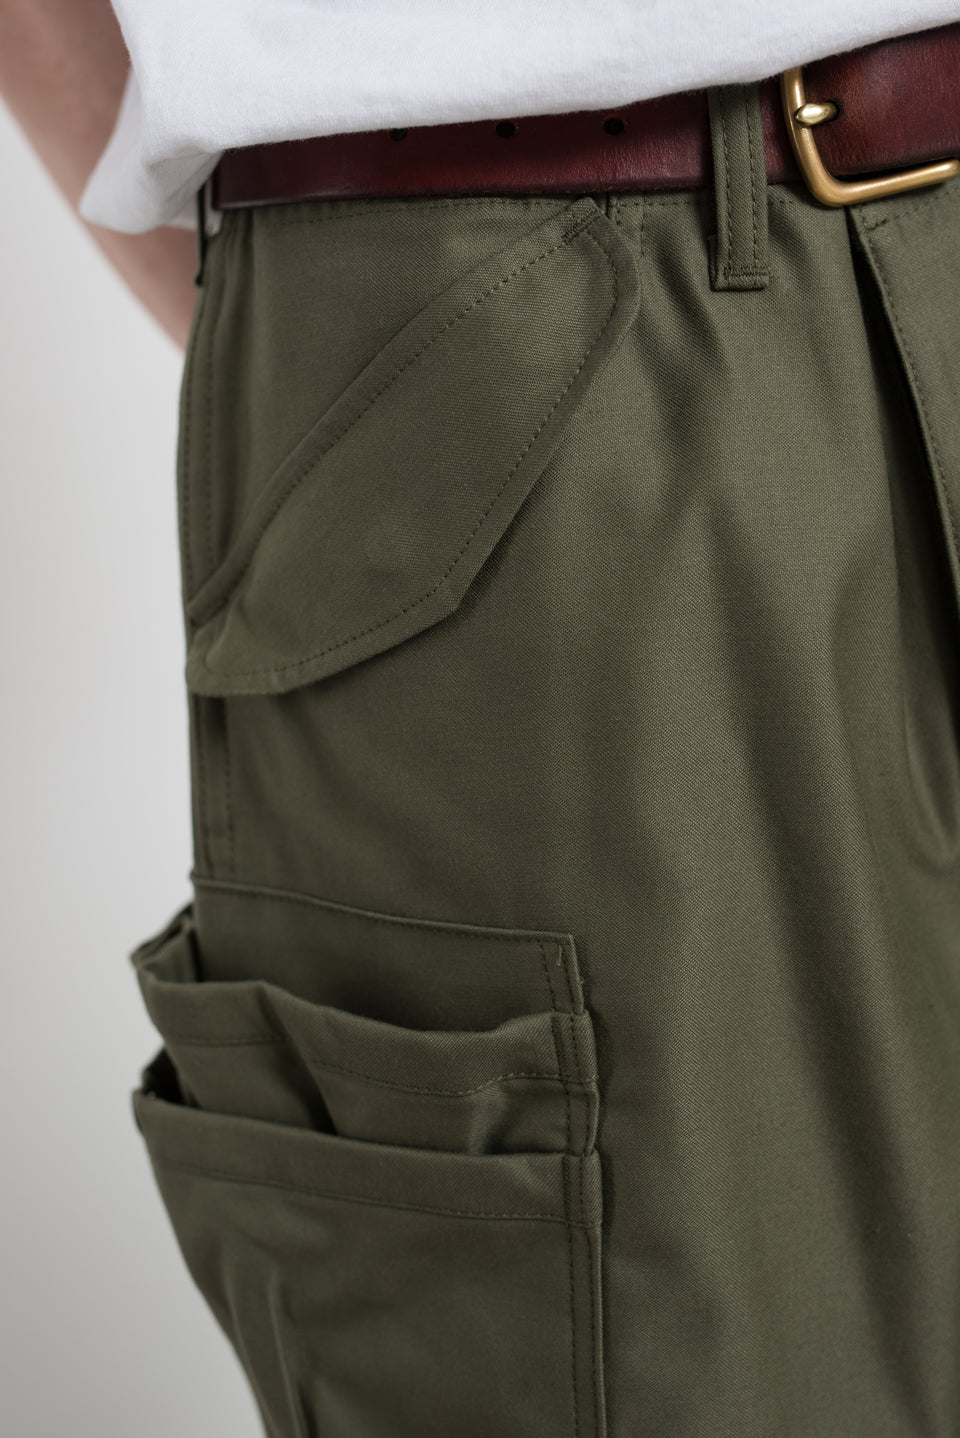 Sassafras SS23 Made in Japan SF-232009 Overgrown Pants Back Satin Olive Calculus Victoria BC Canada